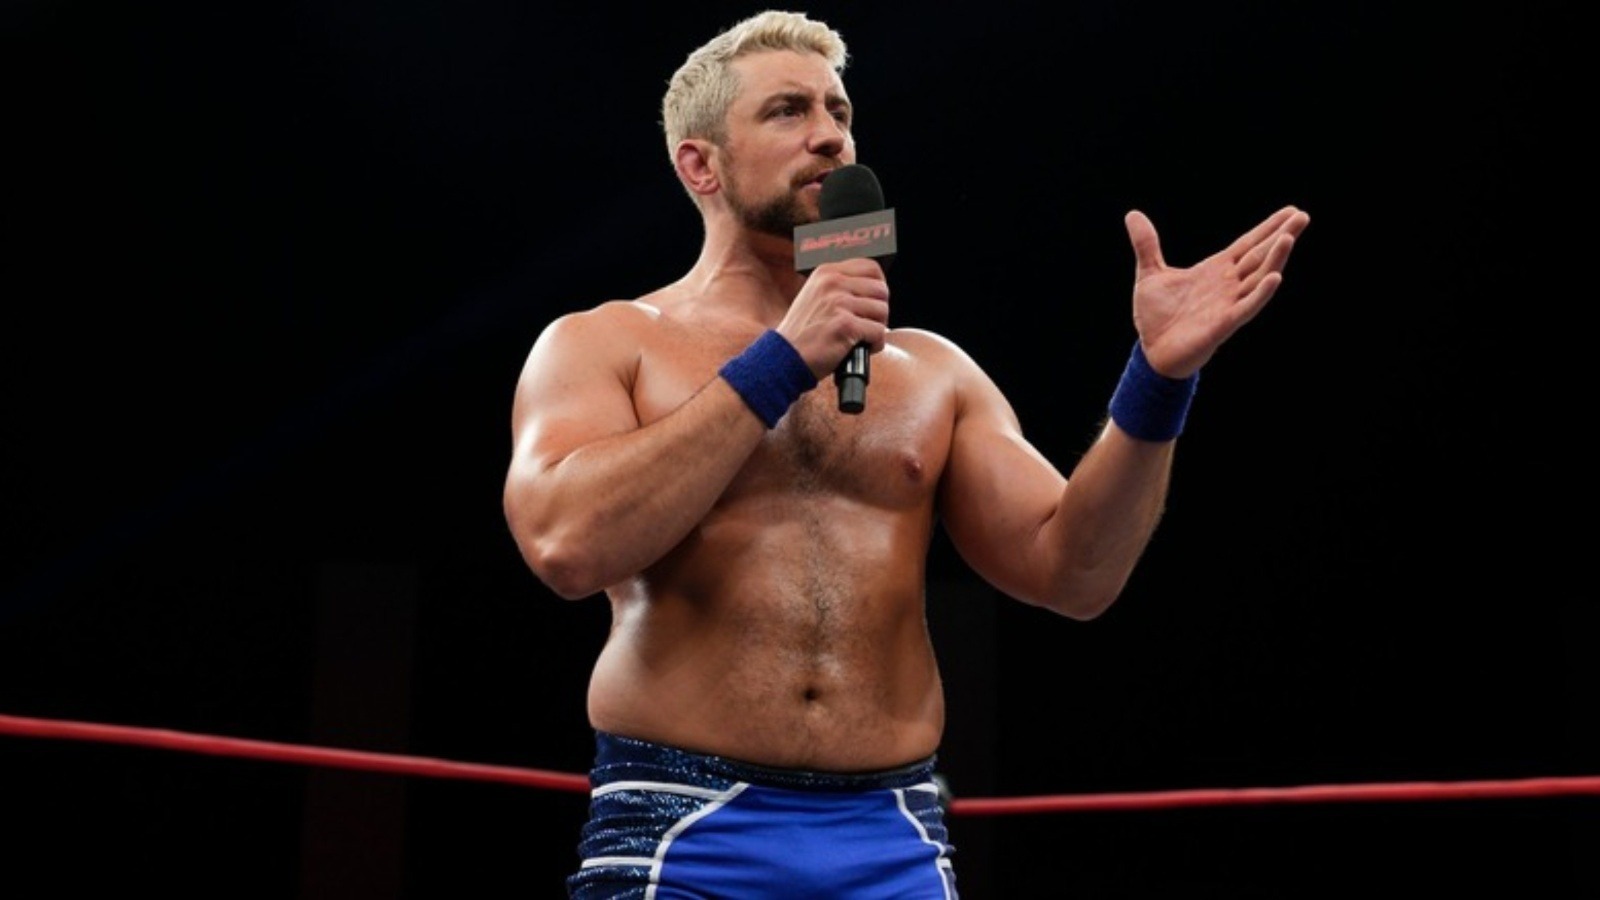 TNA wrestling star Joe Hendry explains why he released his theme song as a single